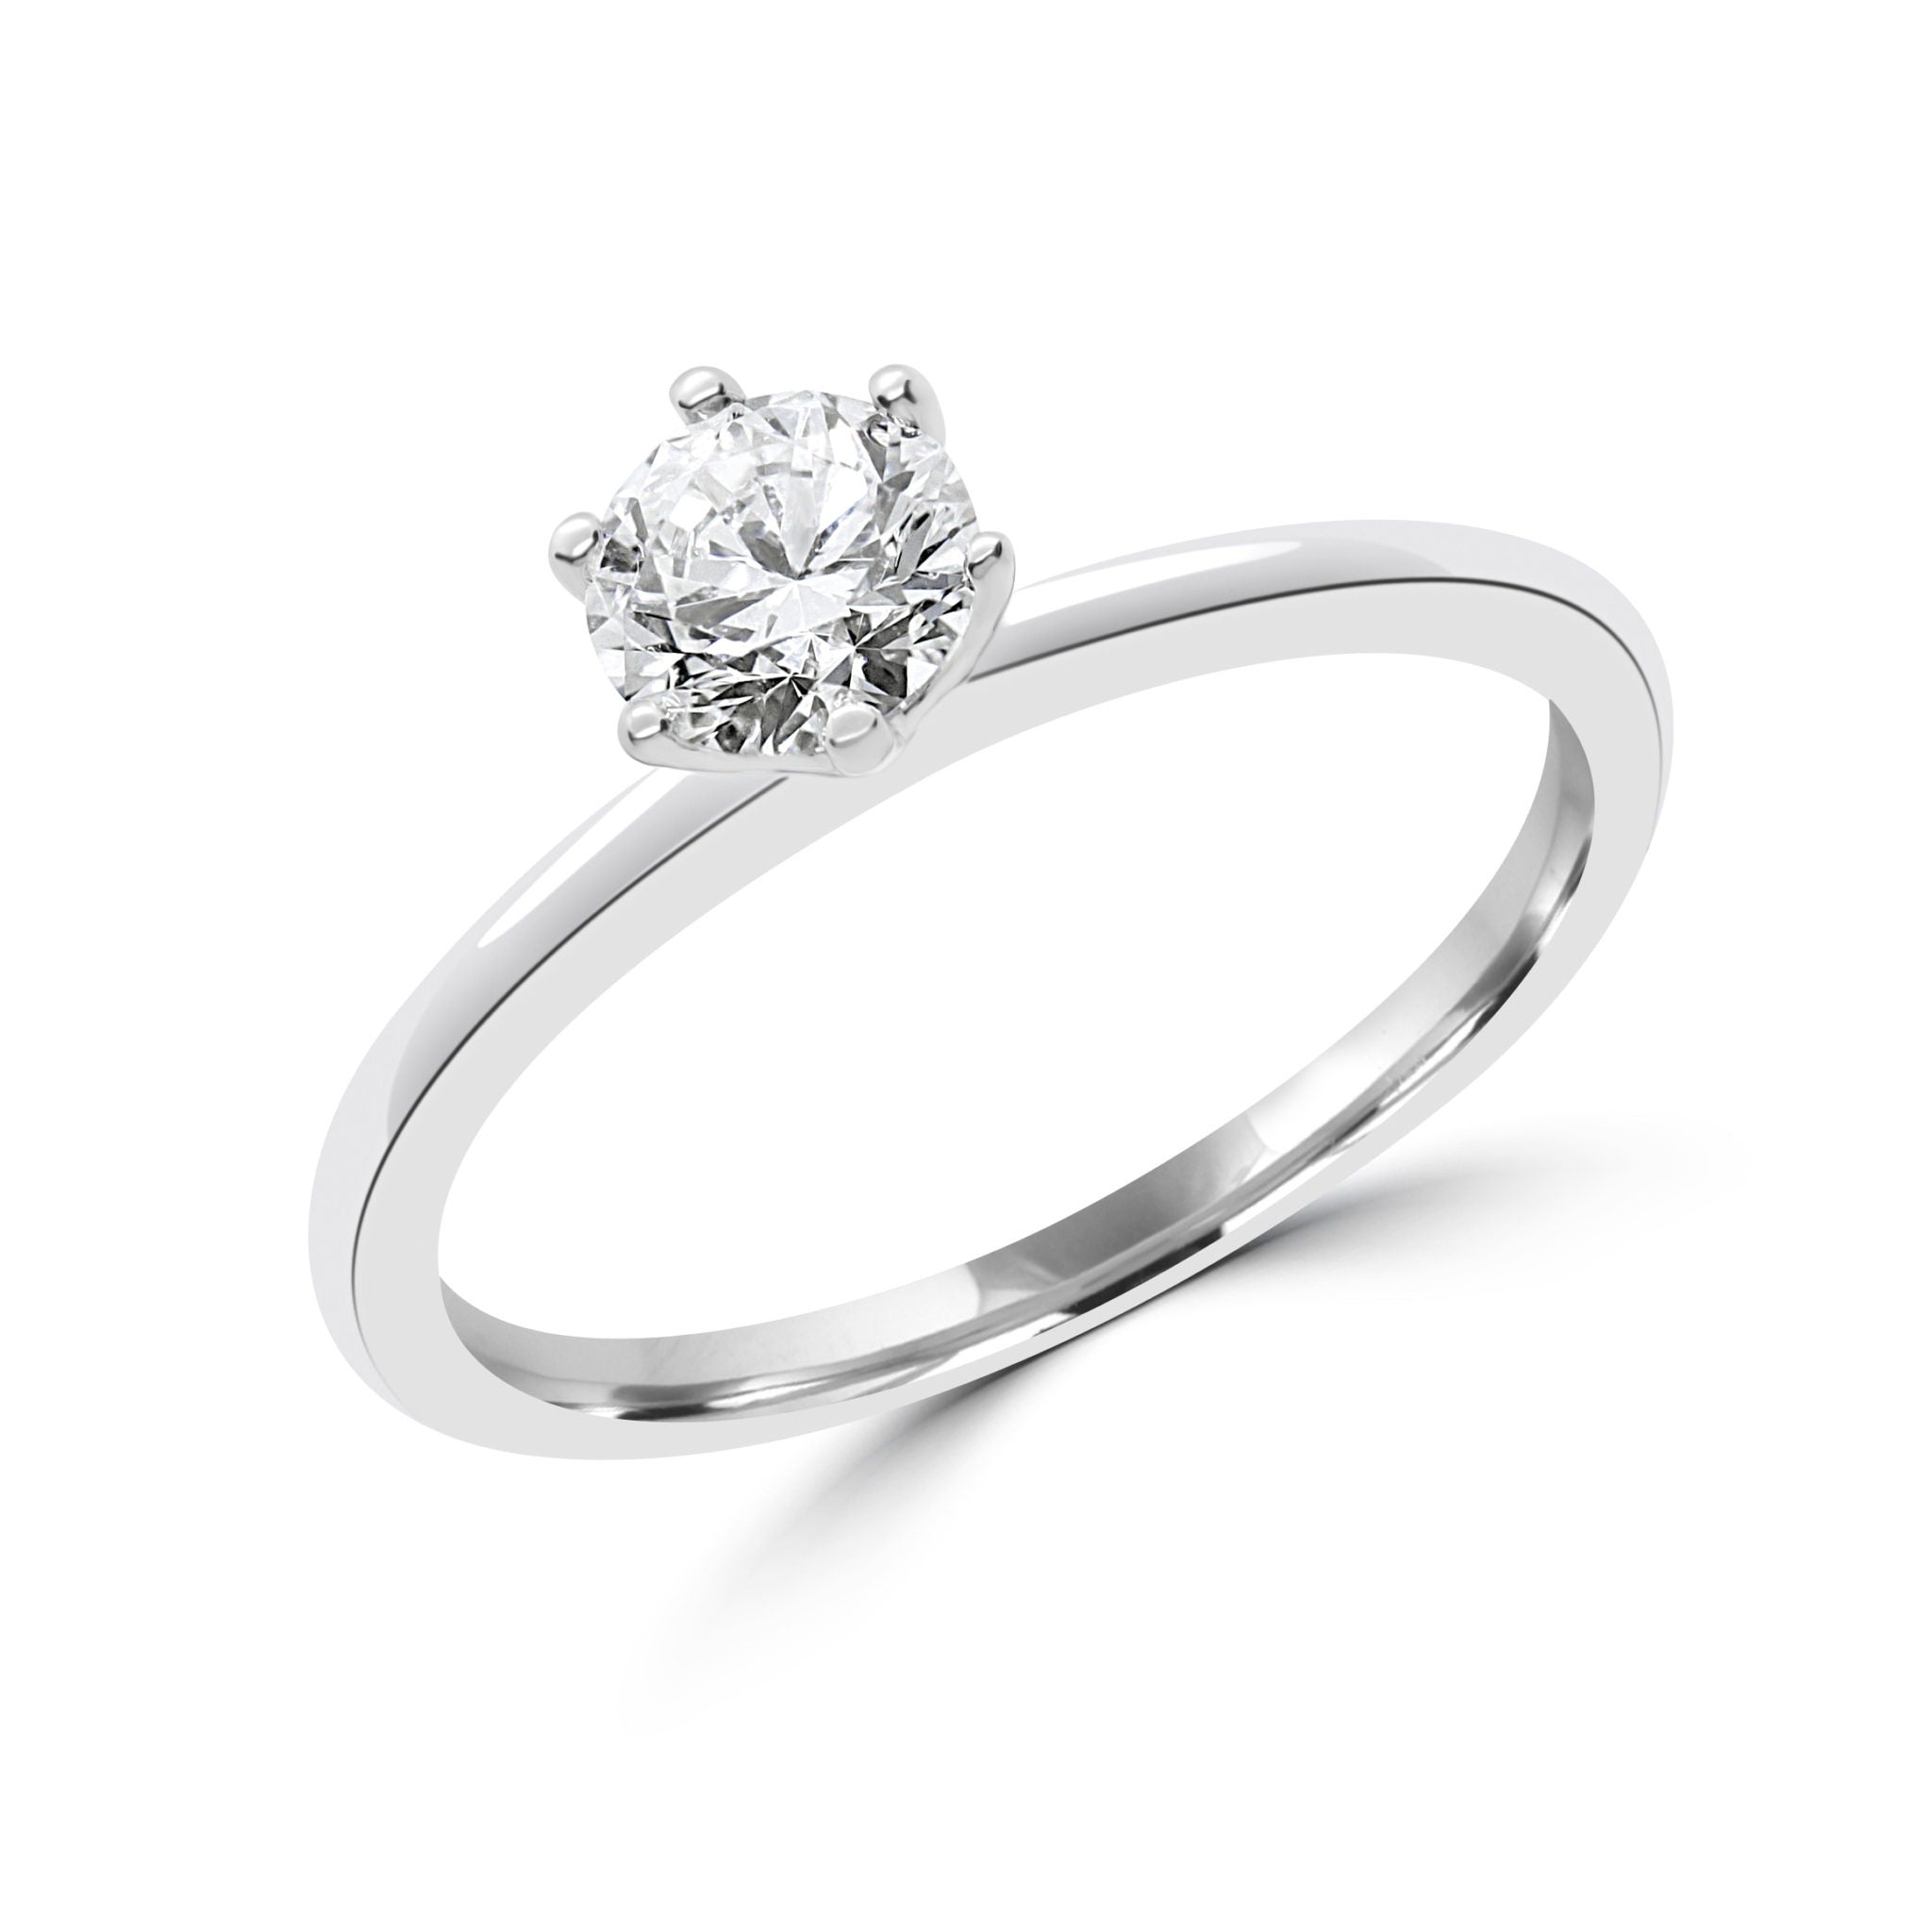 Natural diamond Solitaire engagement ring 0.50 (ctw)14k white gold